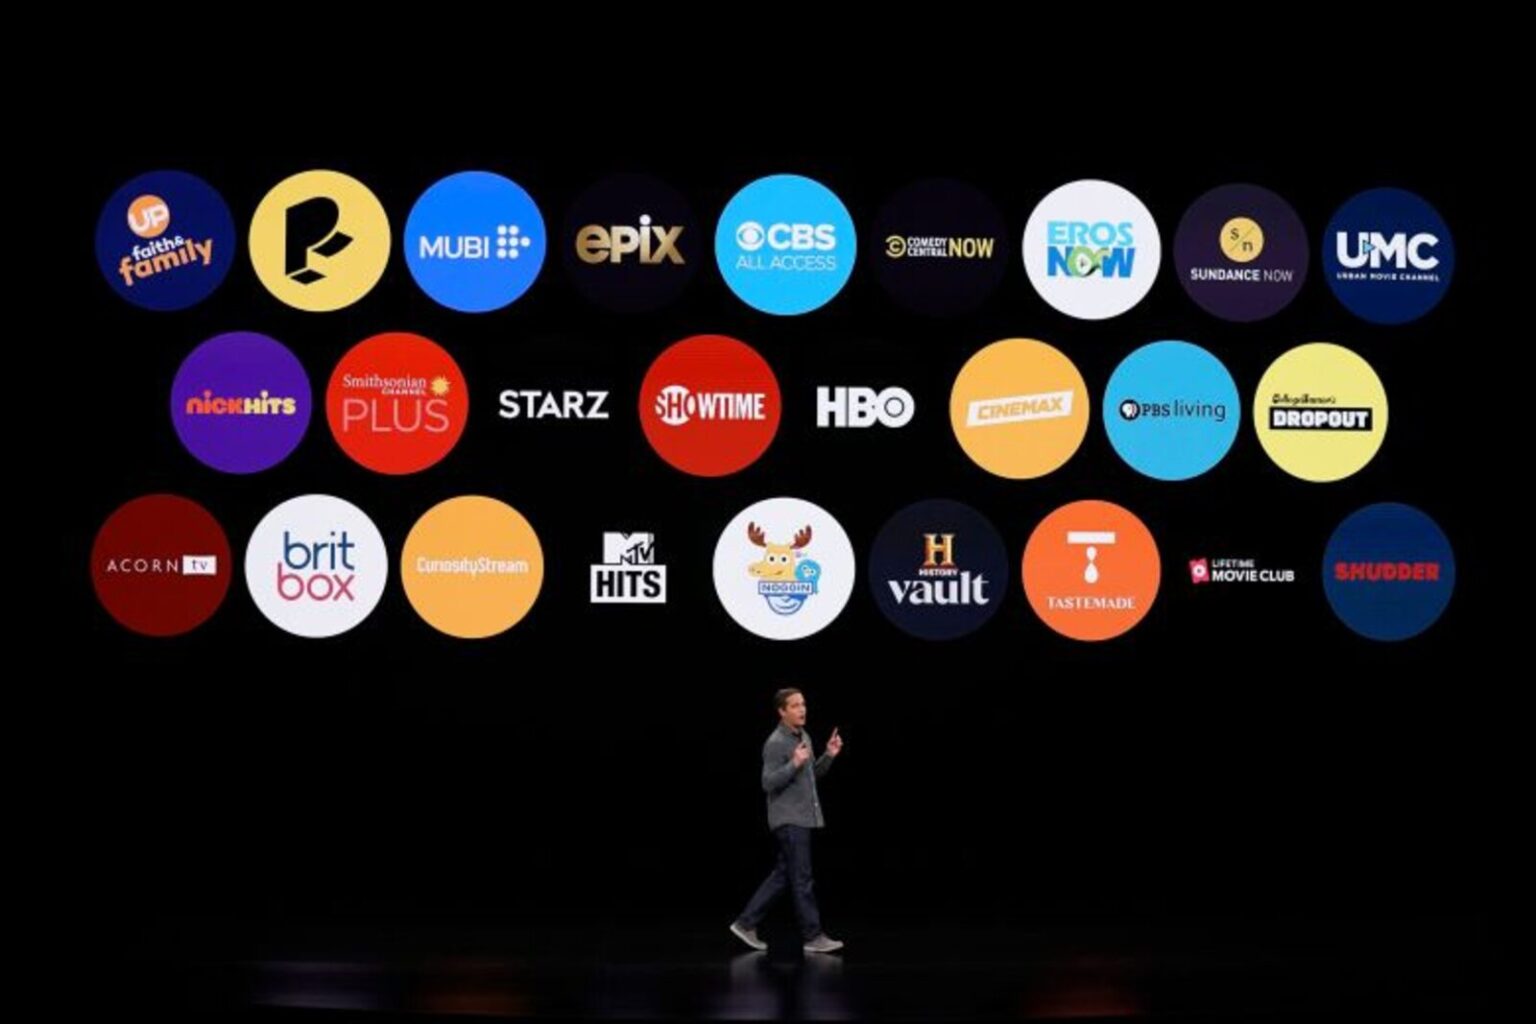 Which platform should you pick? Check out our streaming service comparison here, and decide which one best fits all your entertainment needs here.